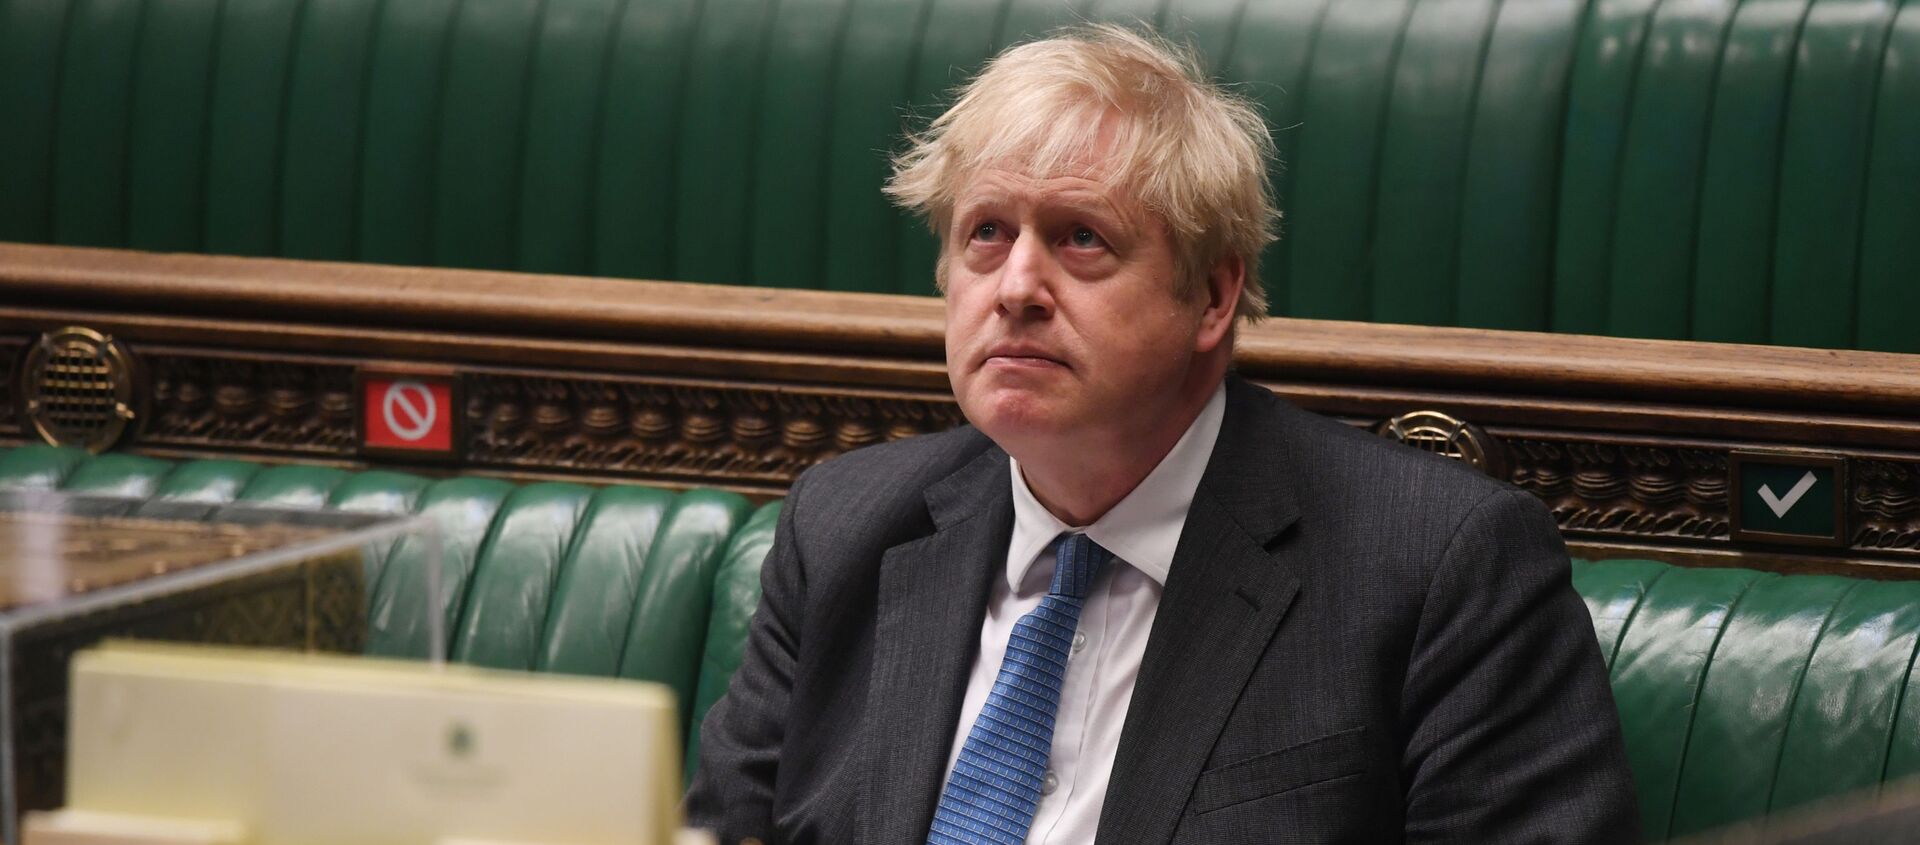 British Prime Minister Boris Johnson attends question period at the House of Commons in London, Britain April 28, 2021 - Sputnik International, 1920, 29.04.2021